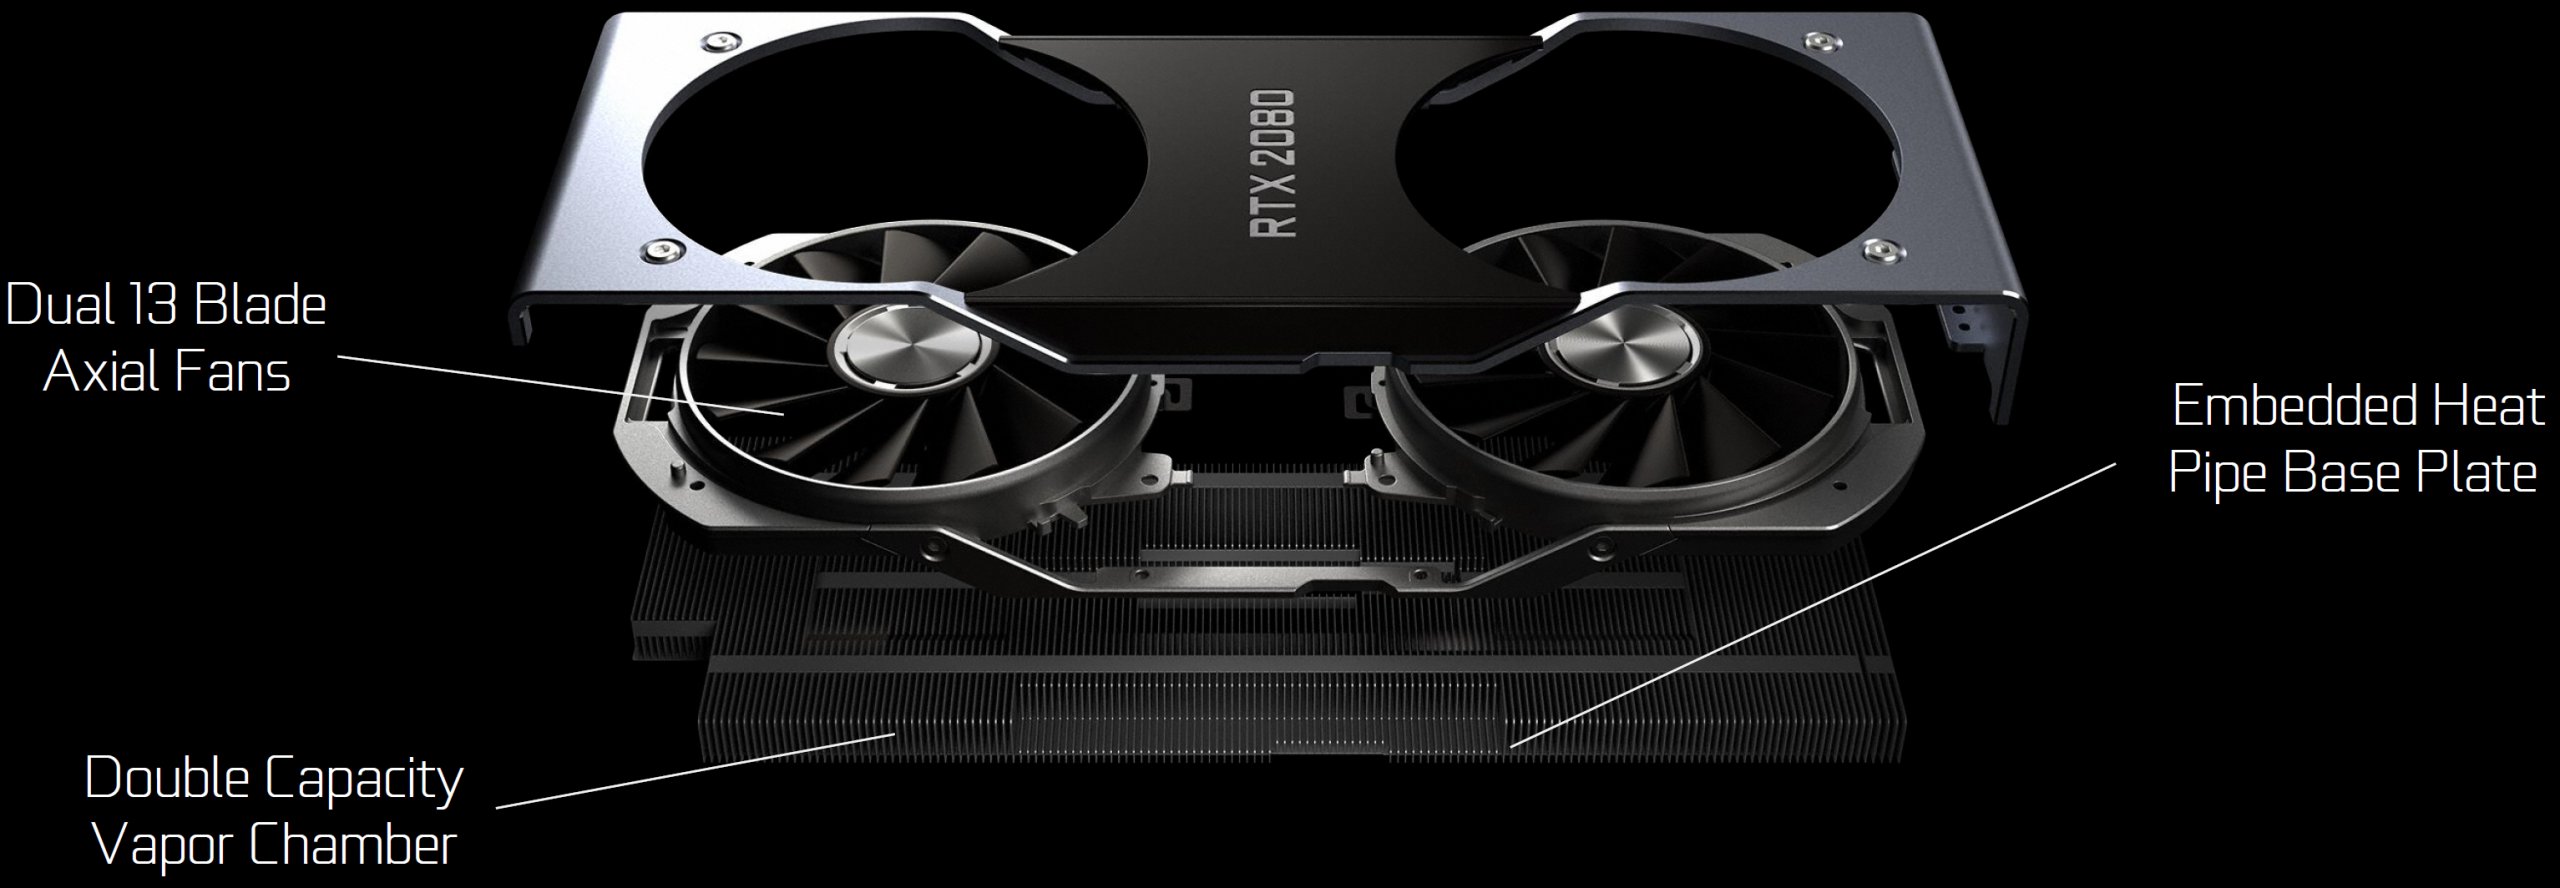 enkelt gang Kamp træk vejret Nvidia GeForce RTX 2080 and RTX 2080 Ti in review - Gaming, Turing  benchmarks and new insights | Page 22 | igor´sLAB